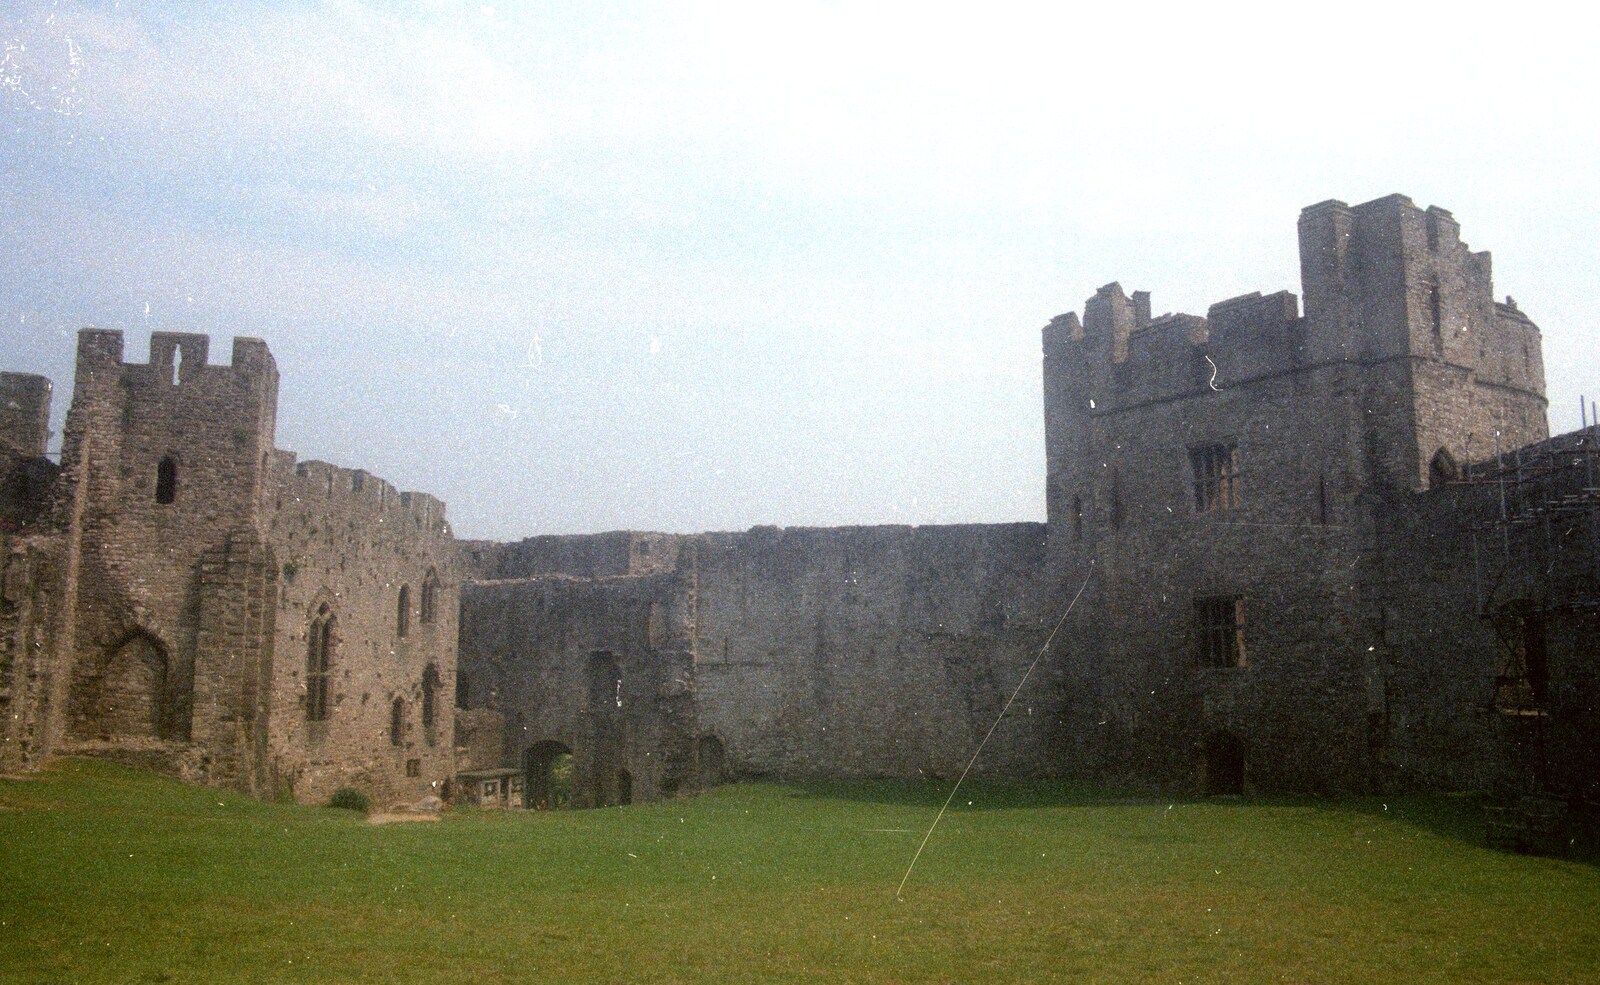 The castle walls from A Trip to Chepstow, Monmouthshire, Wales - 5th July 1986